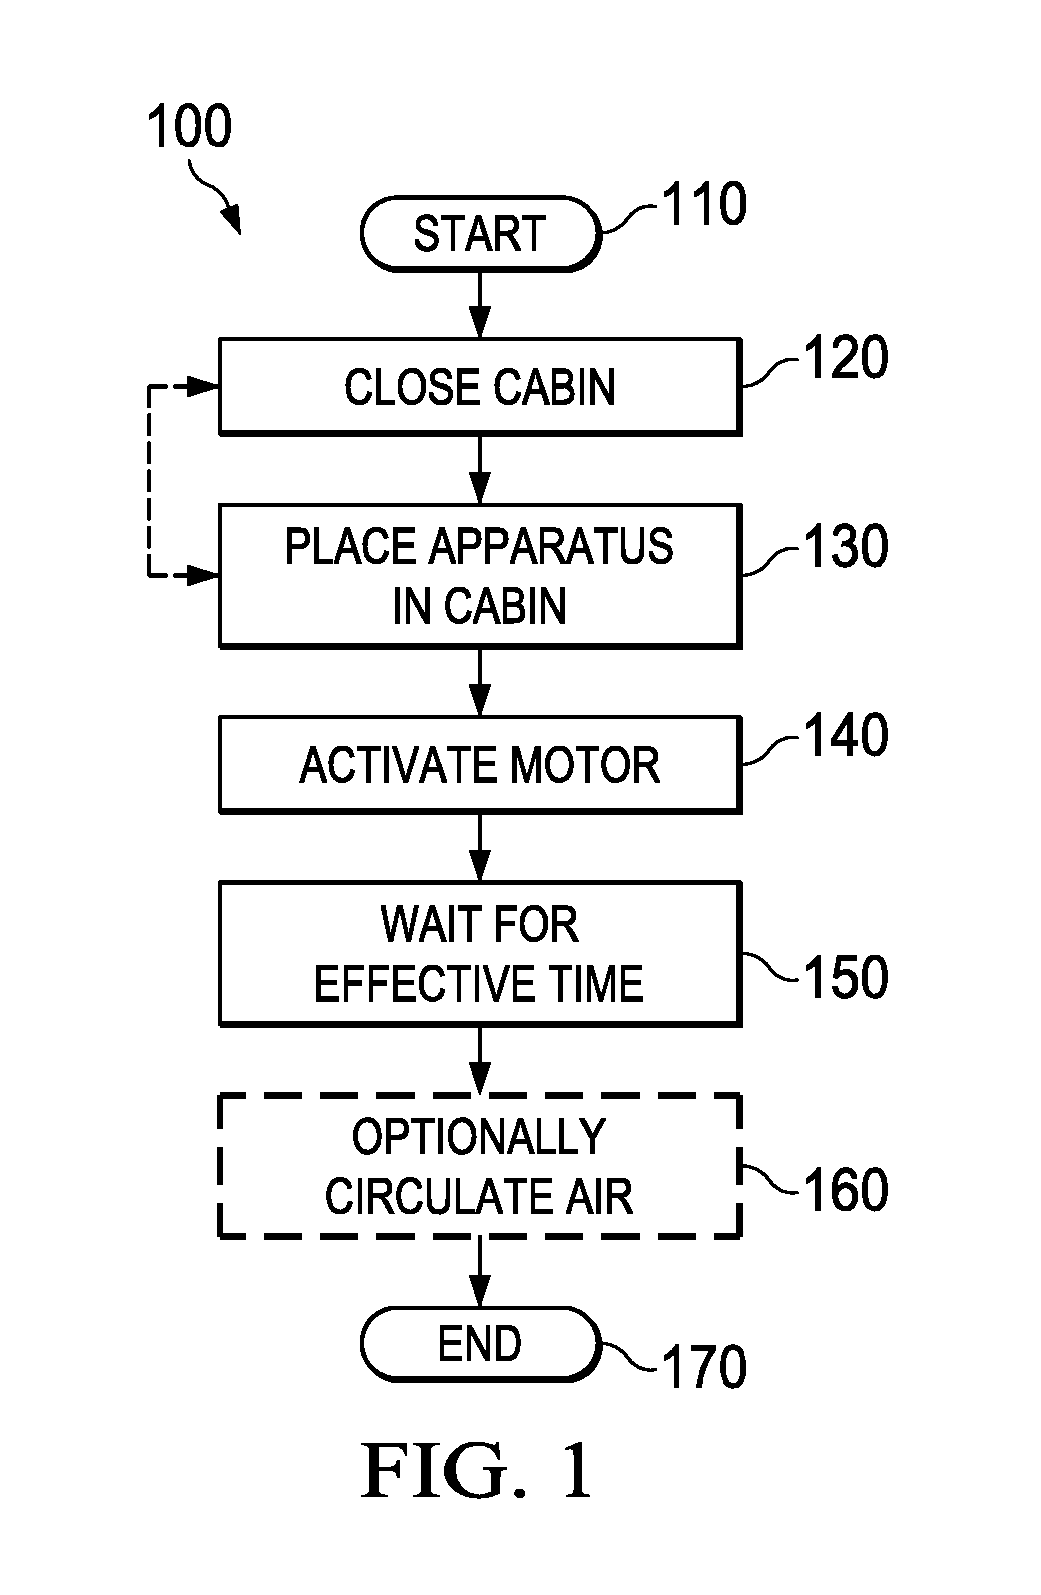 Apparatus and system for air-borne cleaning of surfaces